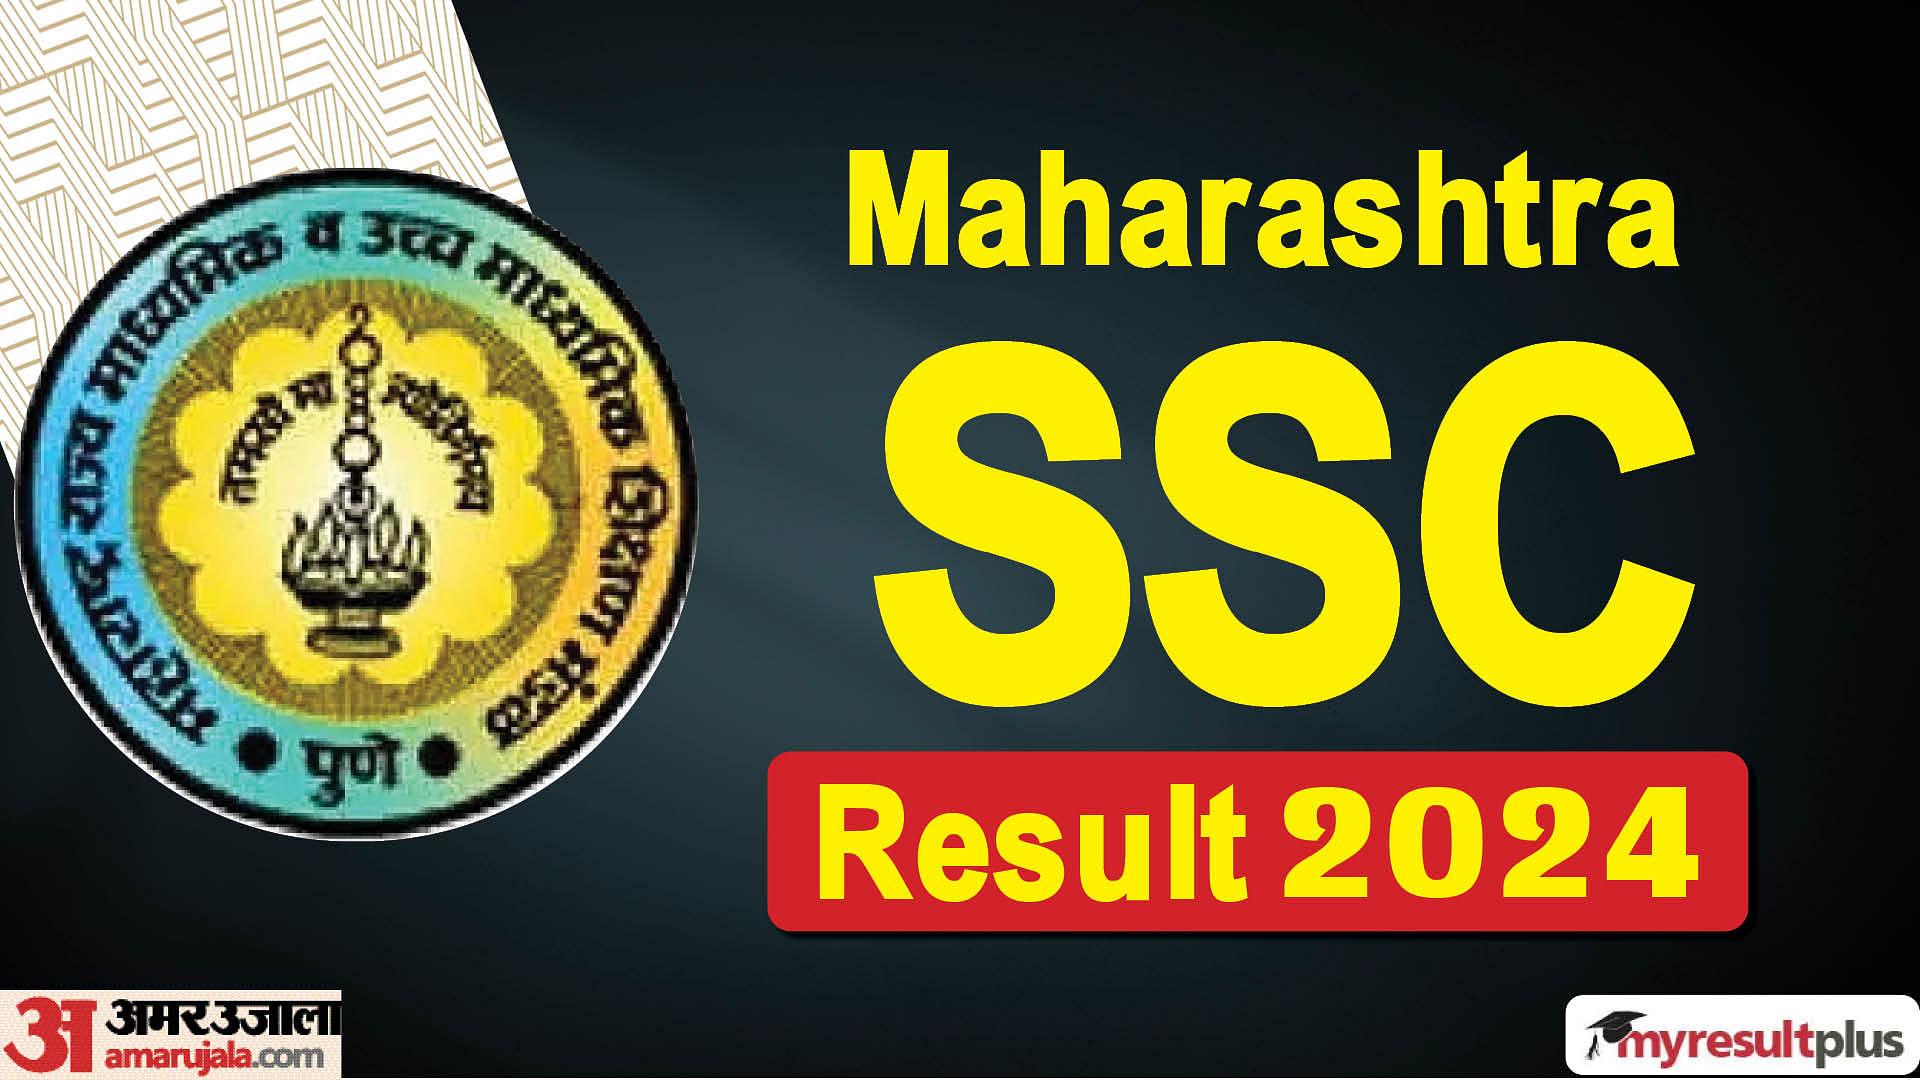 Maharashtra SSC Result 2024 declared, Pass percentage recorded at 95.81%, Read more details here